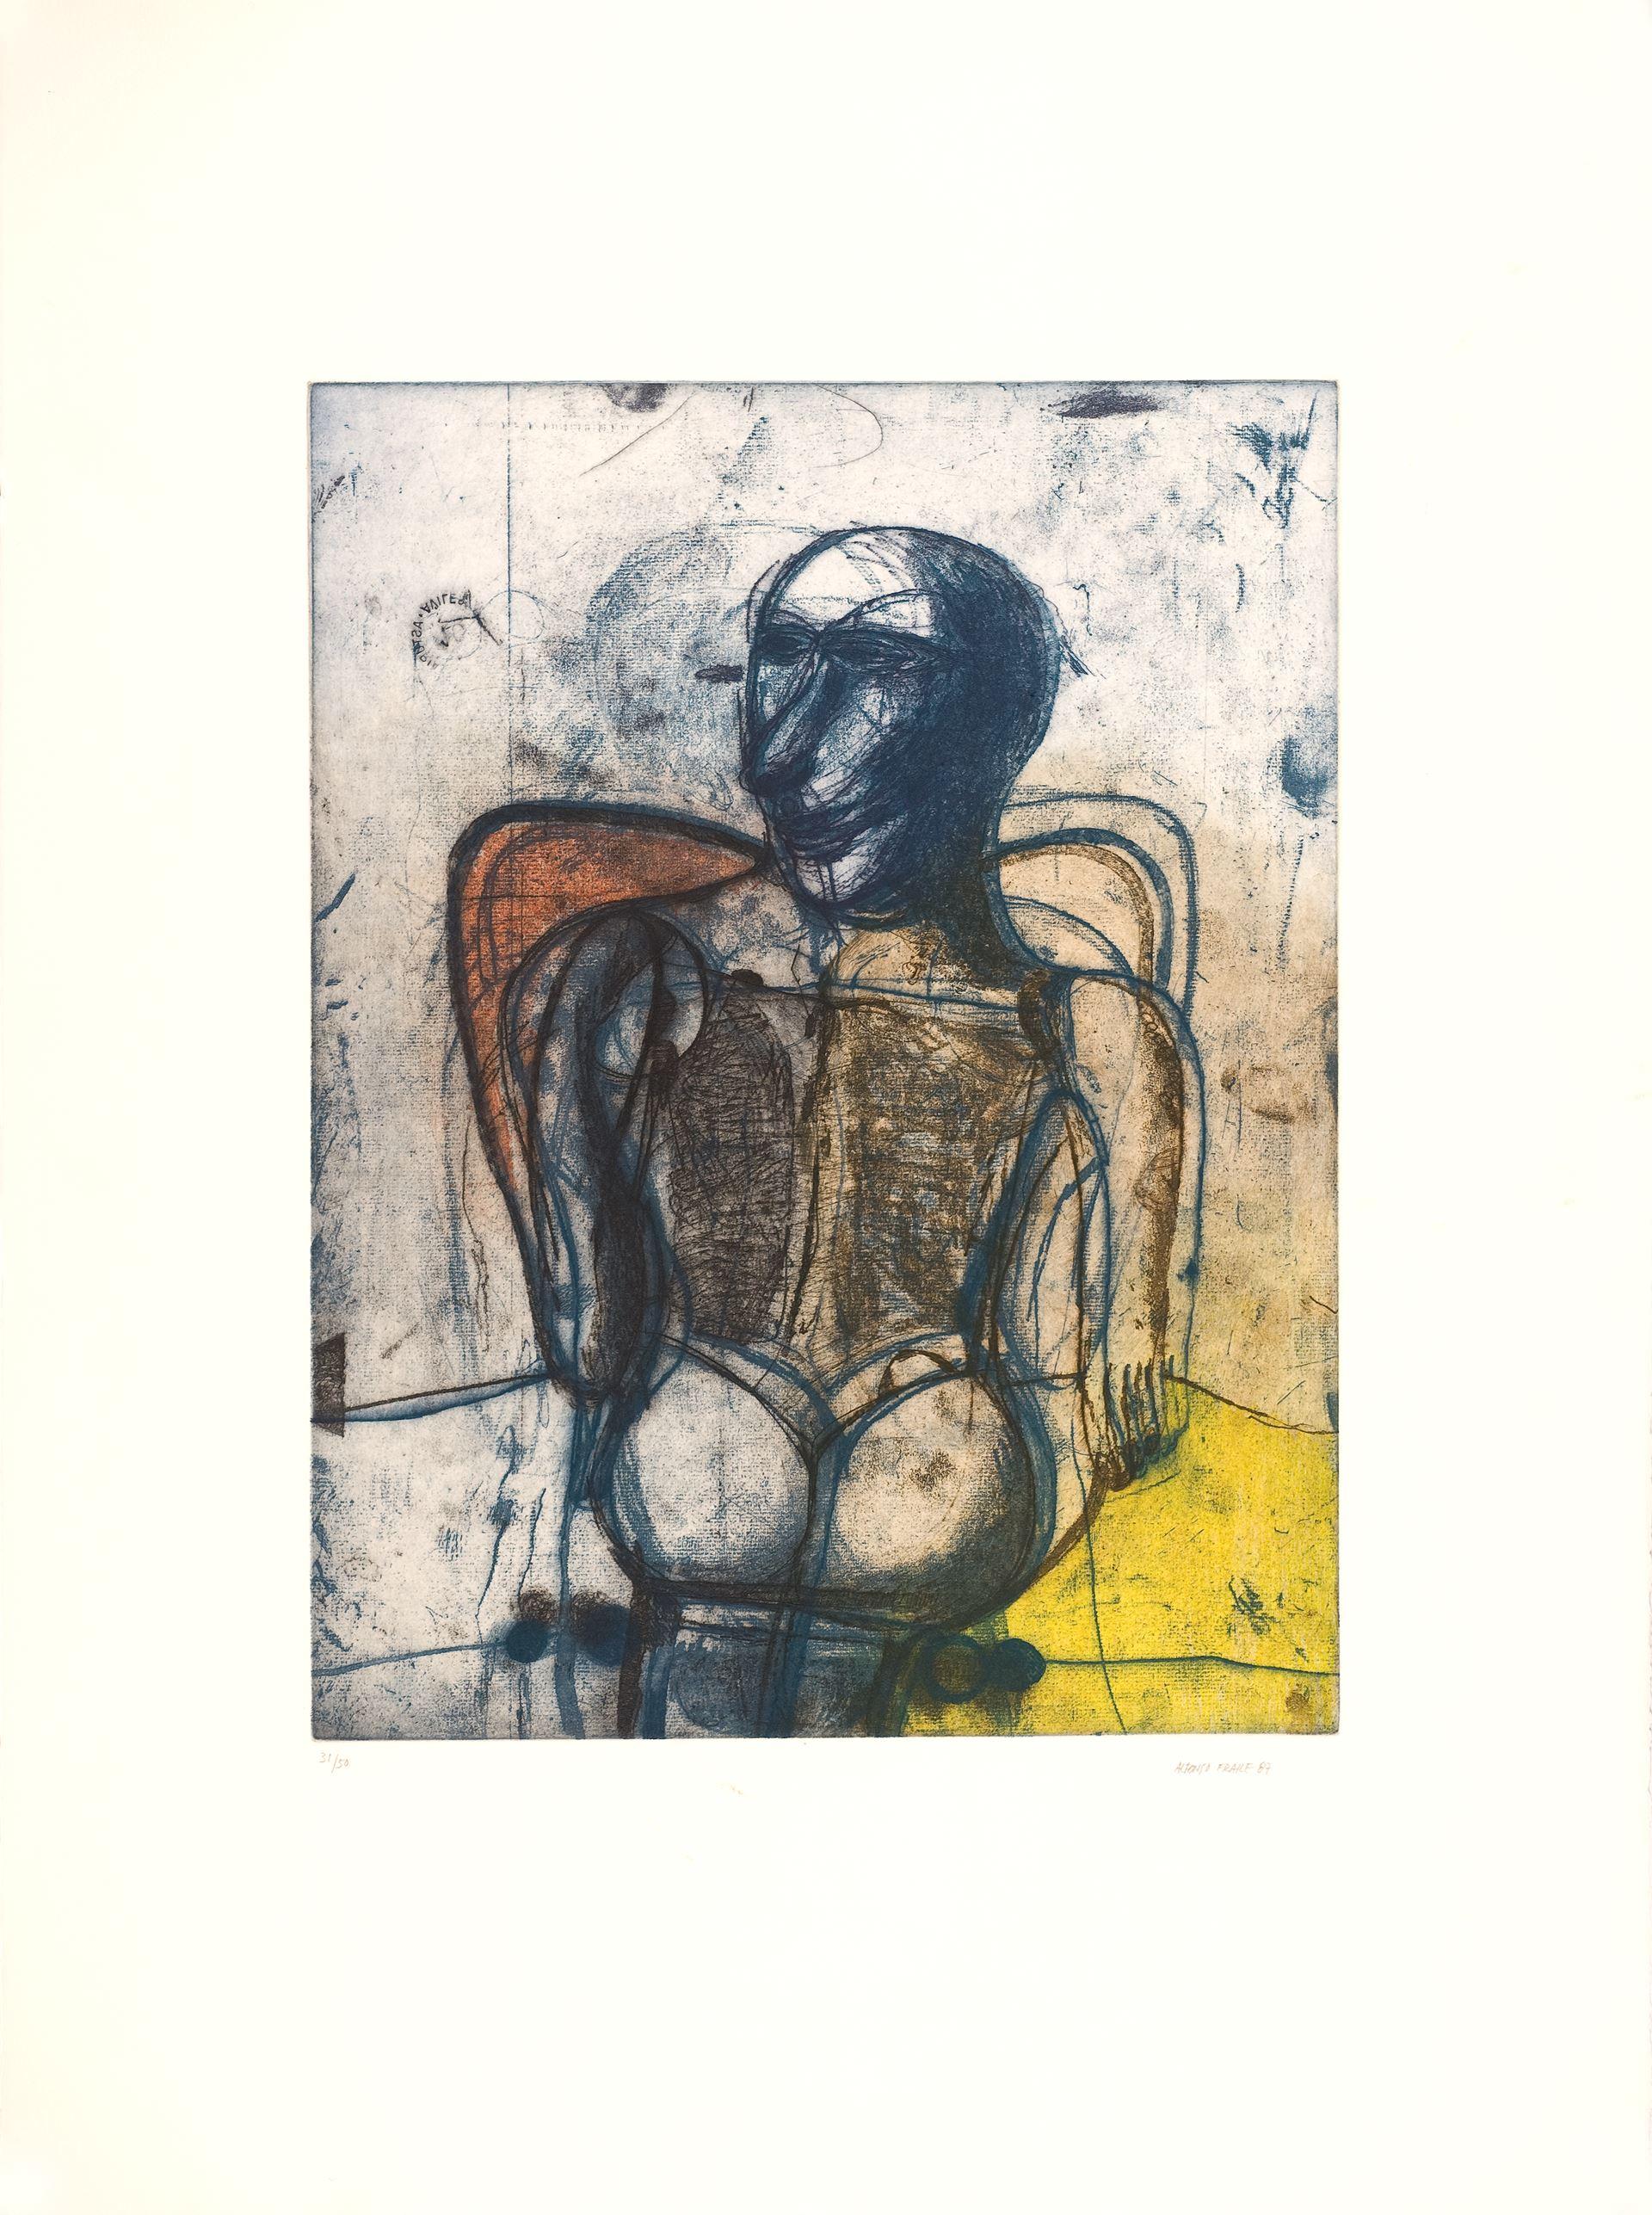 Alfonso Fraile (Spain, 1930-1988)
'Personaje II', 1987
engraving on paper
30 x 22.1 in. (76 x 56 cm.)
Edition of 50
ID: FRA1262-003-050
Hand-signed by author
_____________________________________________
Alfonso Fraile was a Spanish painter. He was